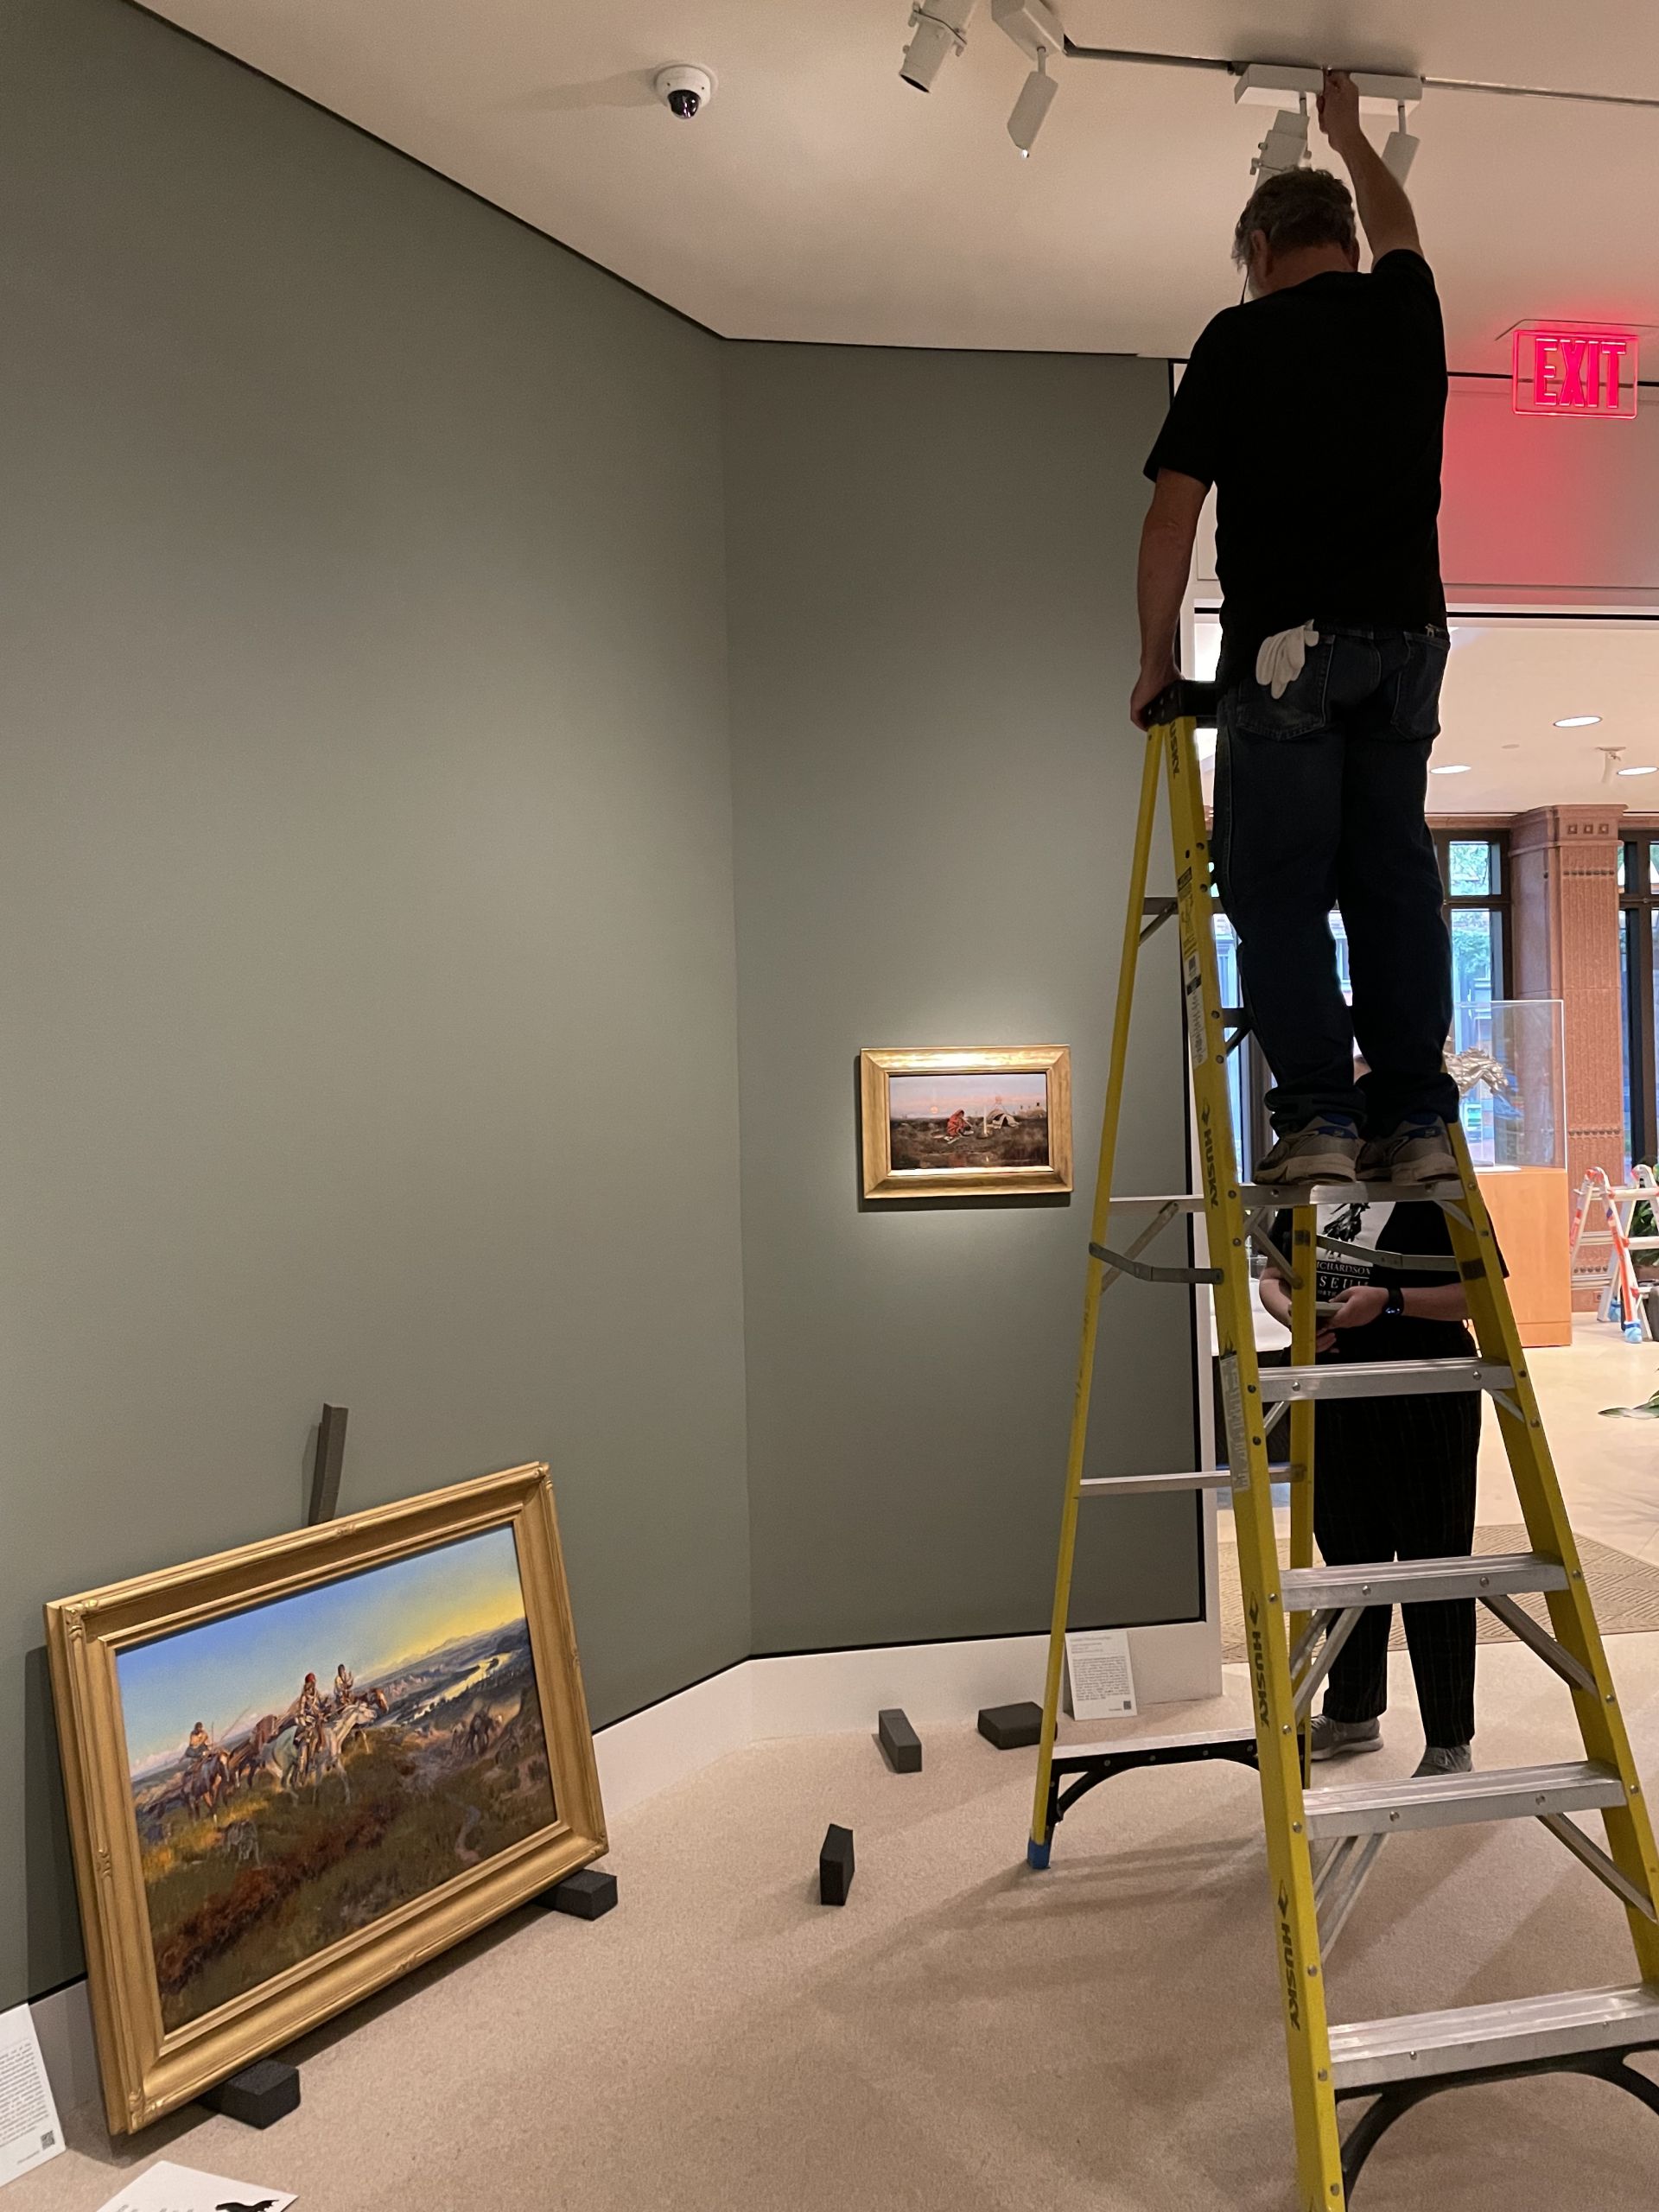 A man on a ladder adjusting a light fixture while looking at a painting on the wall below.